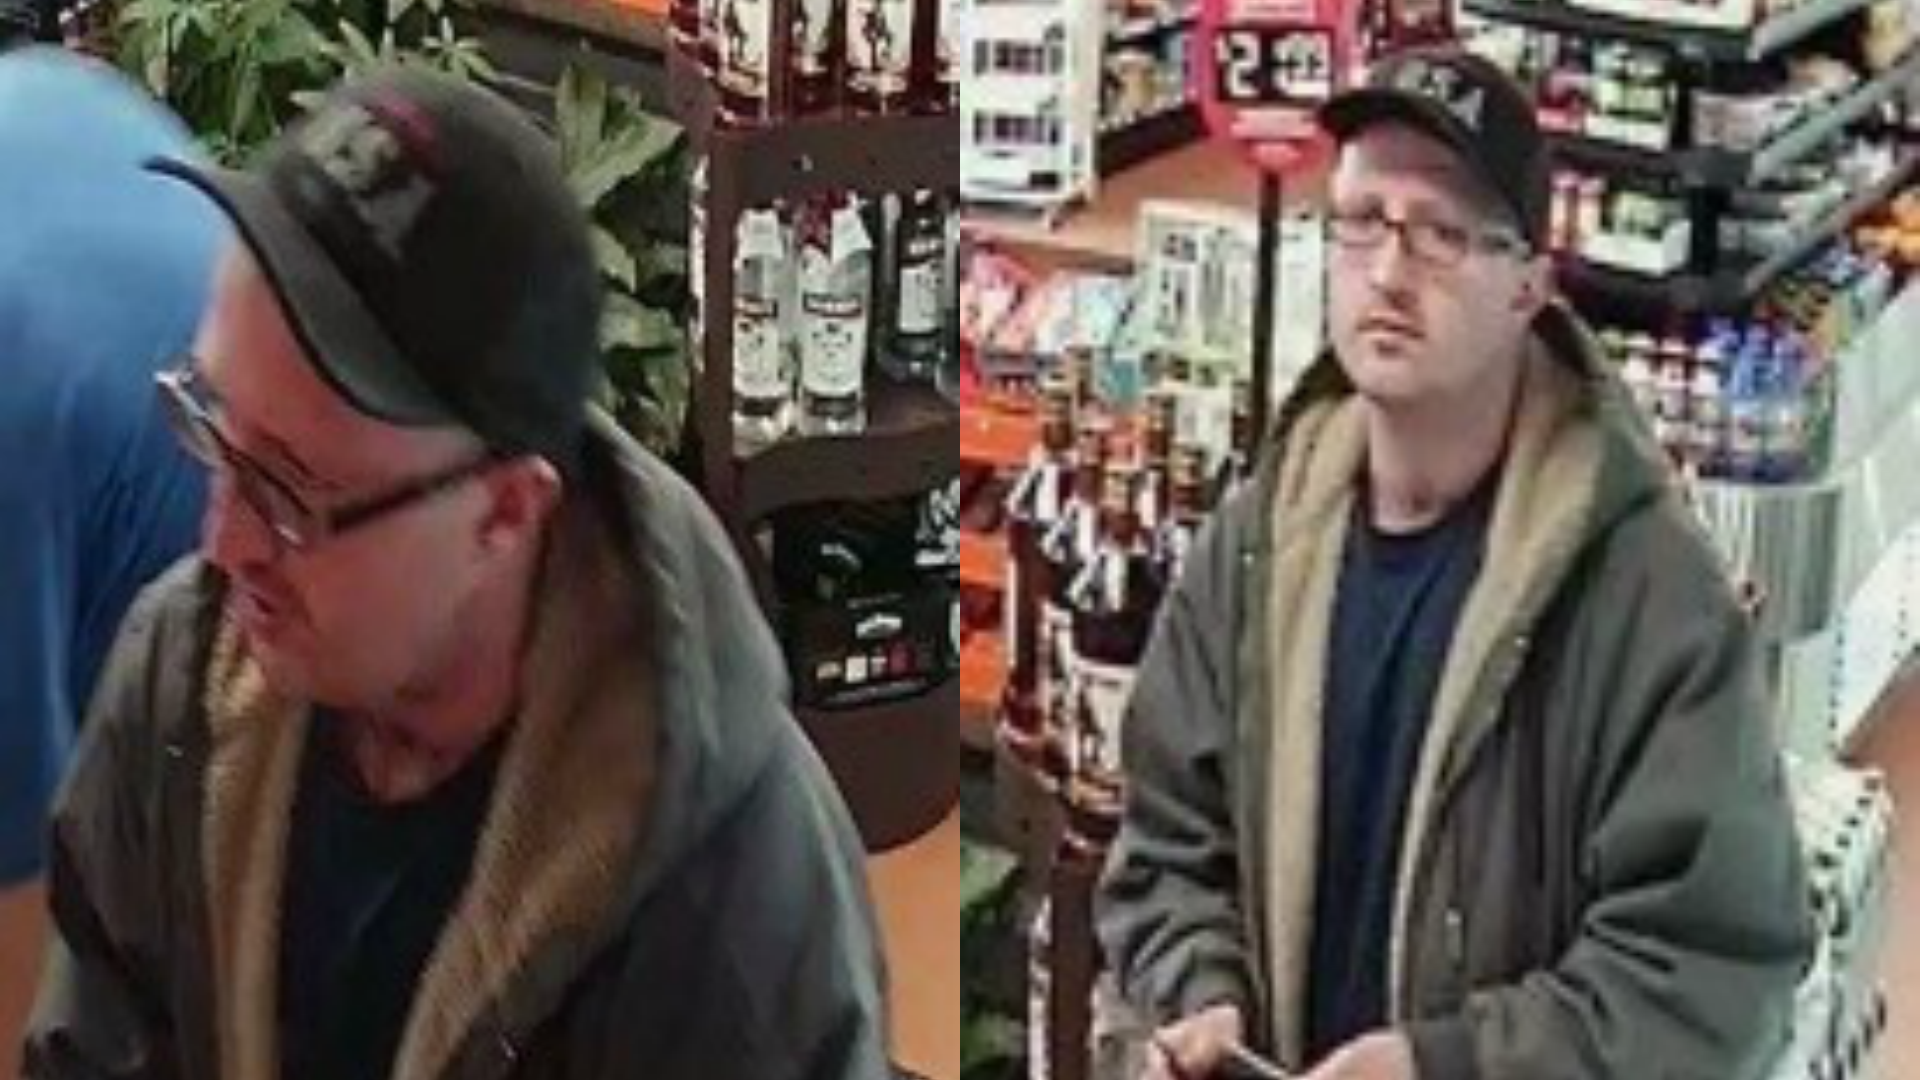 The Grand Haven Department of Public Safety has released a couple of surveillance images in hopes that the community can help them identify the man photographed.